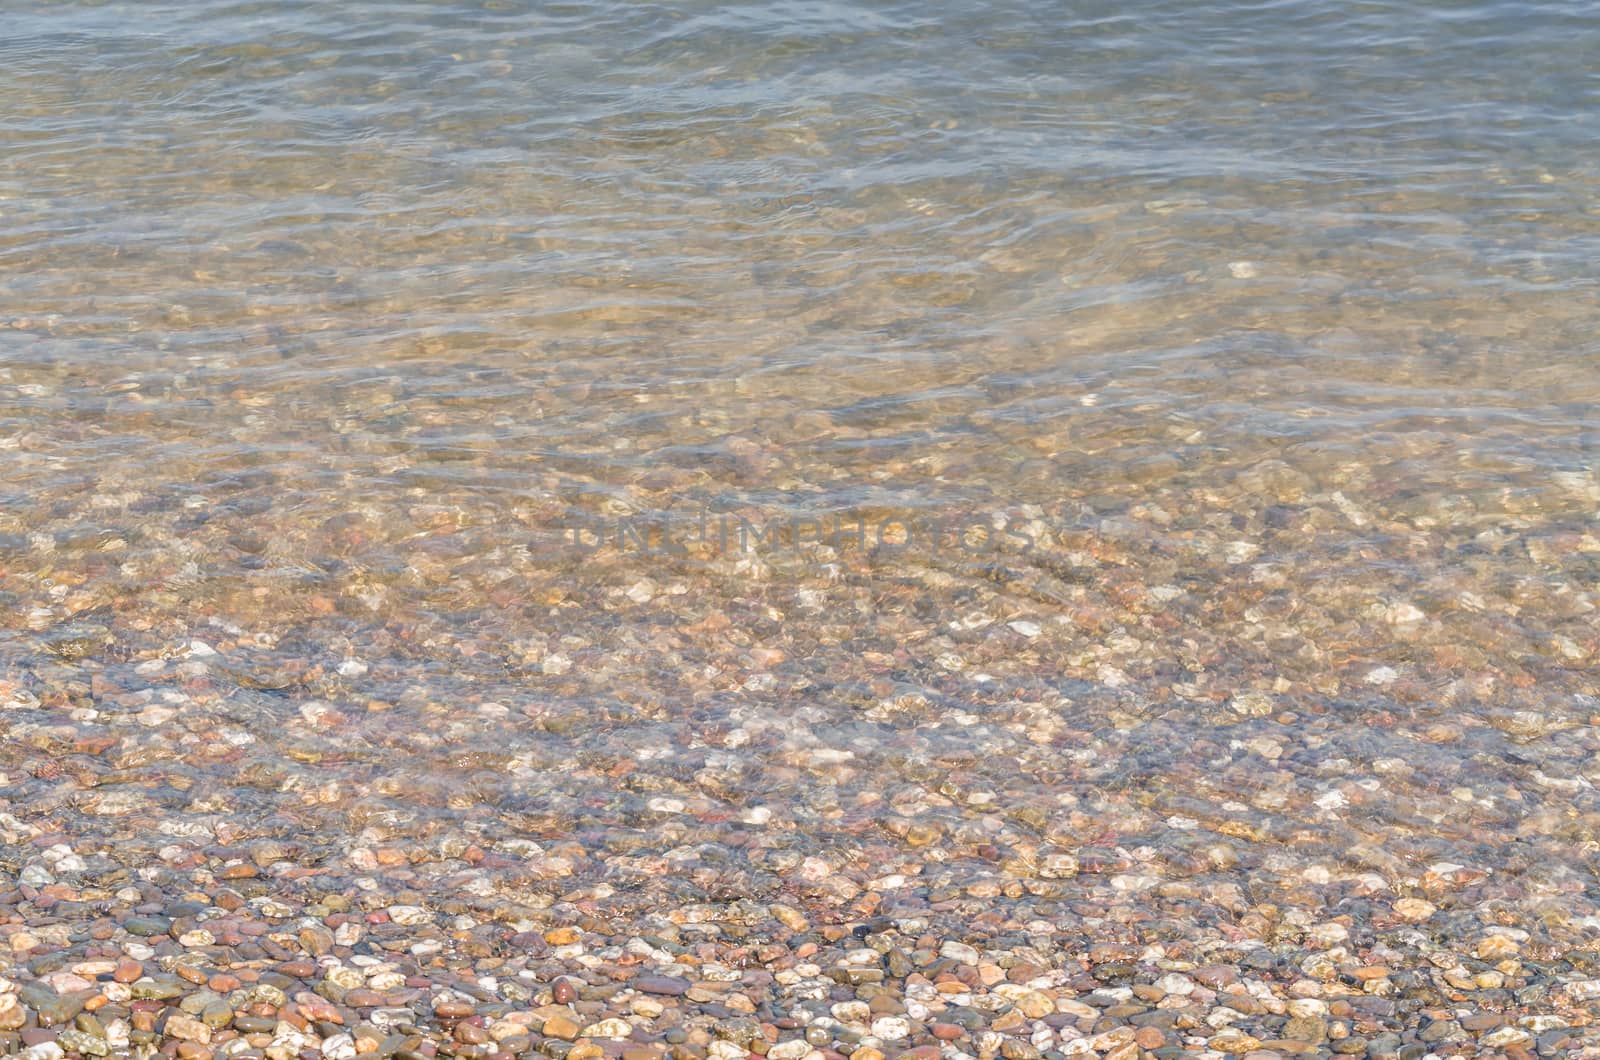 Riverside landscape, view of small pebbles in a clear river.